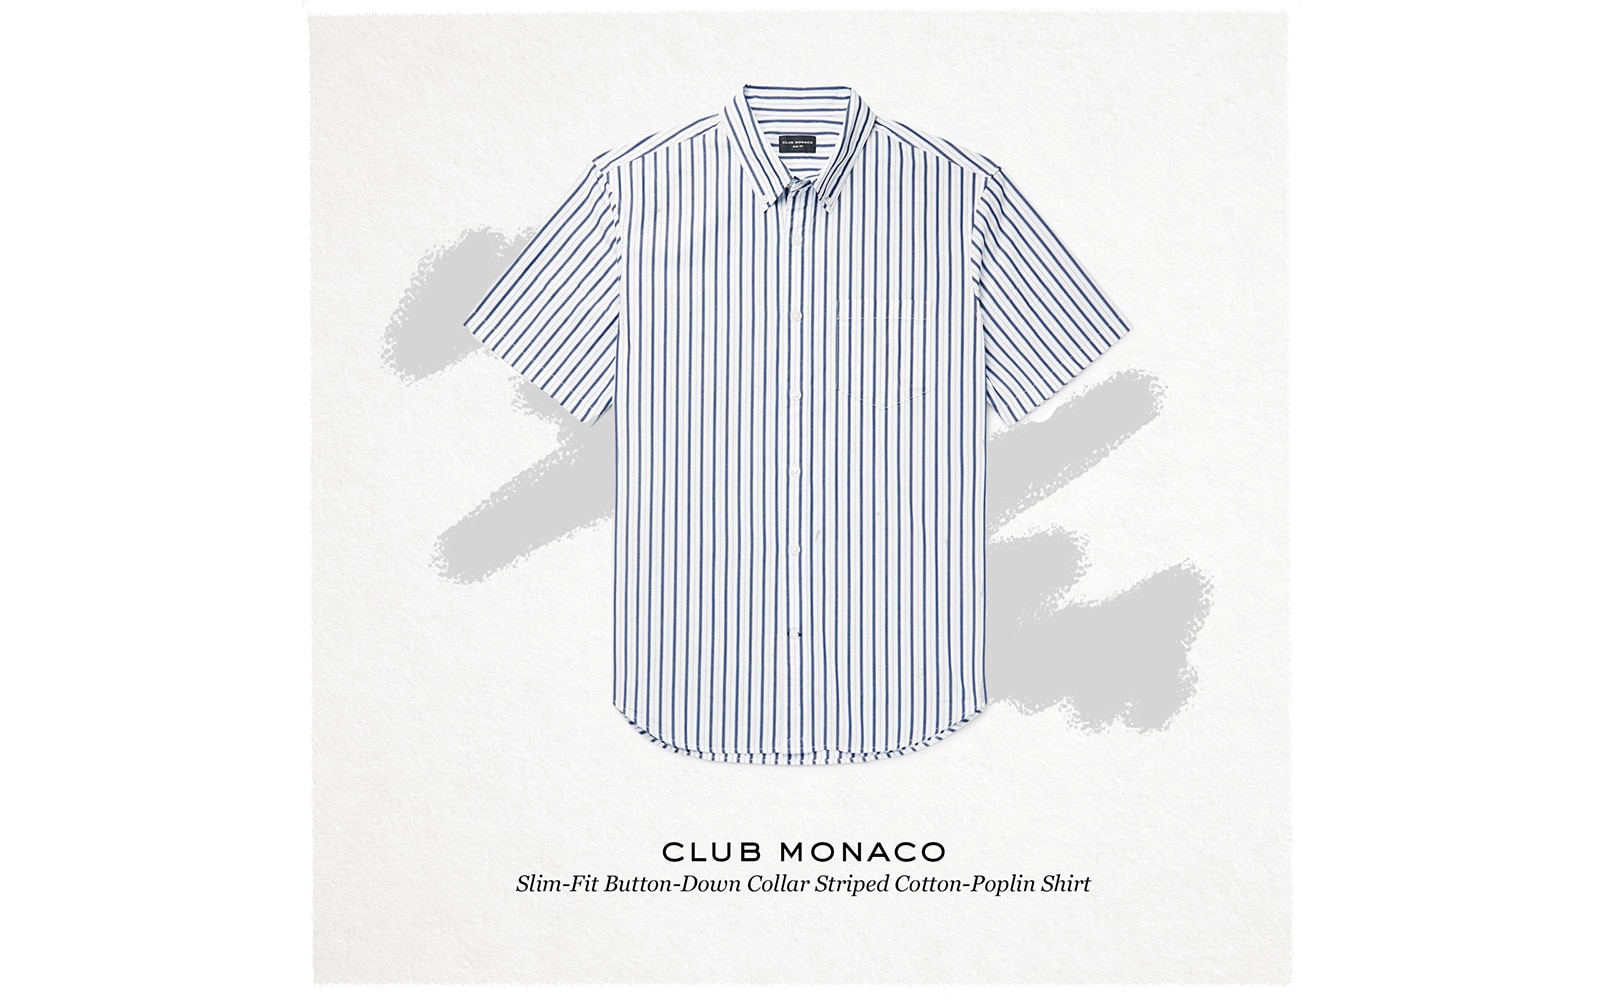 Go Big Or Go Home: Printed Shirts For Summer | The Journal | MR PORTER